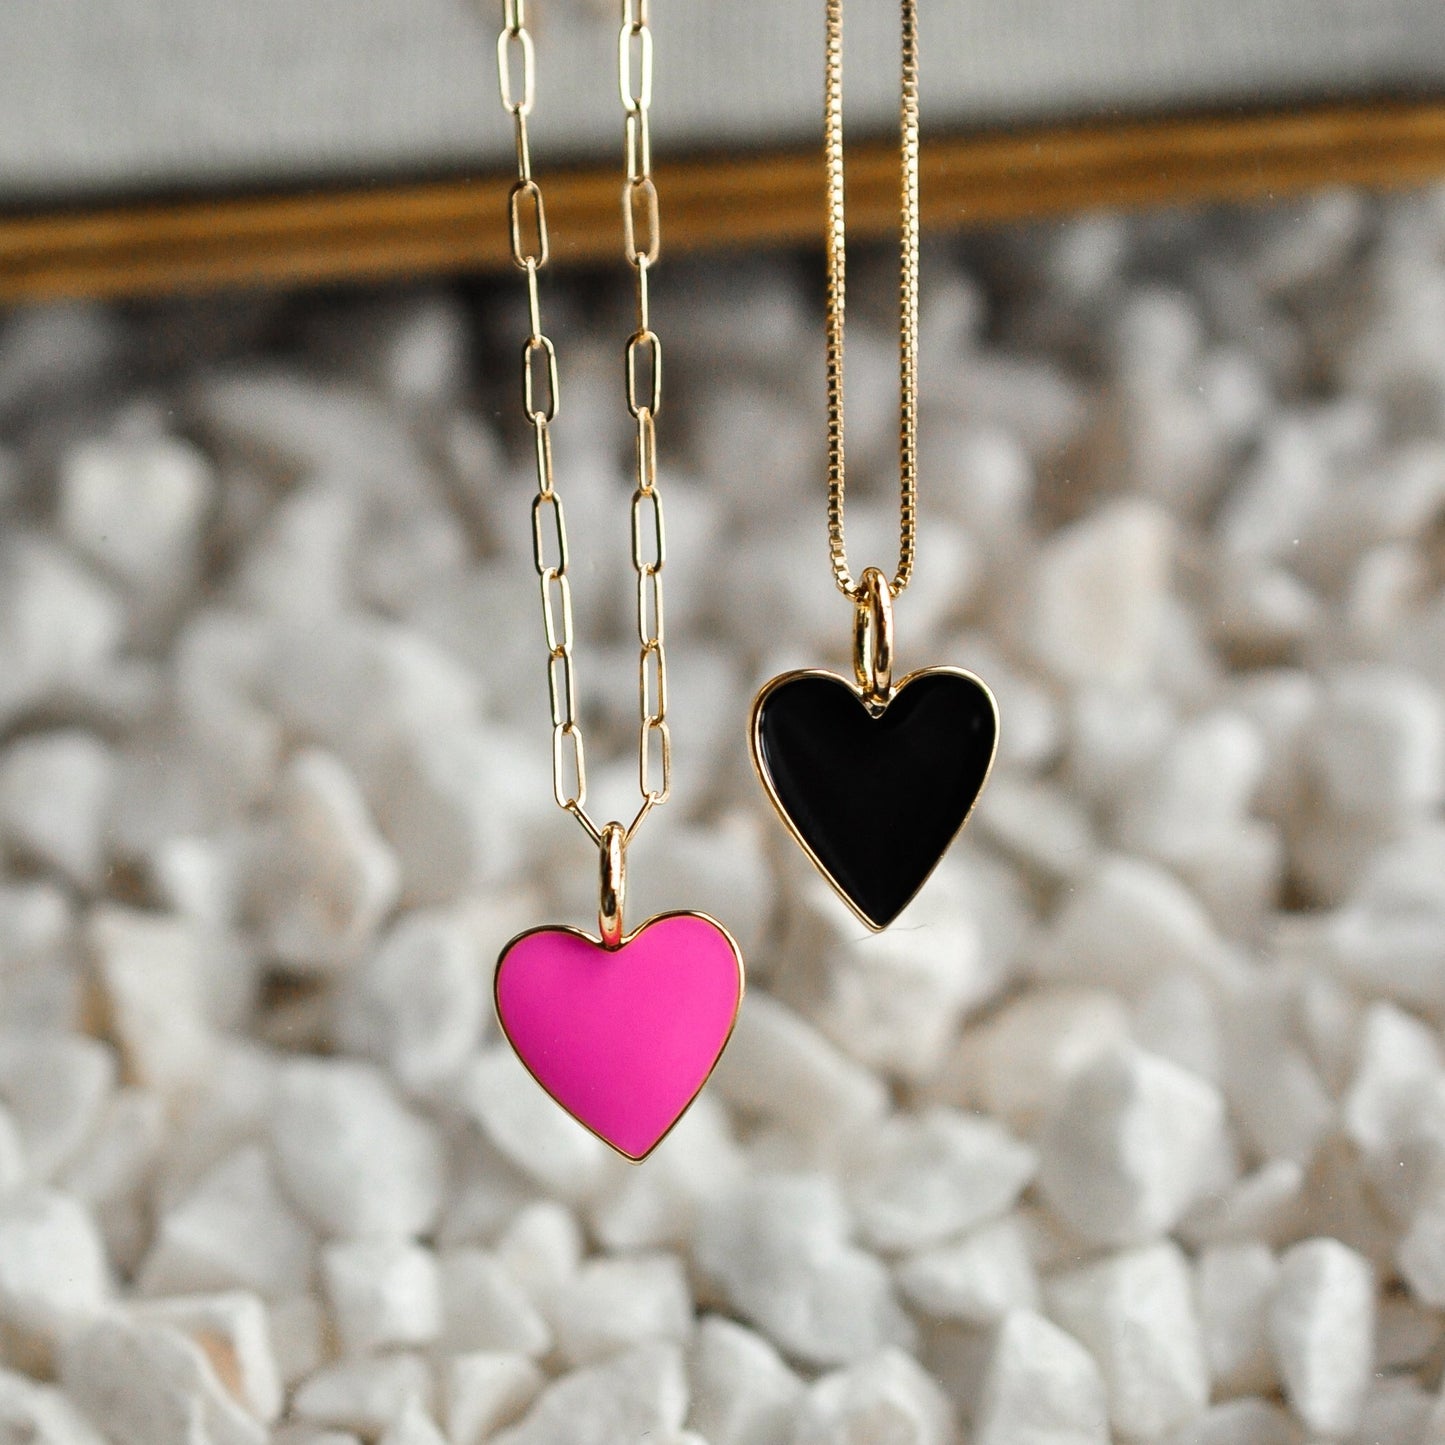 Colored Heart Charm Necklace